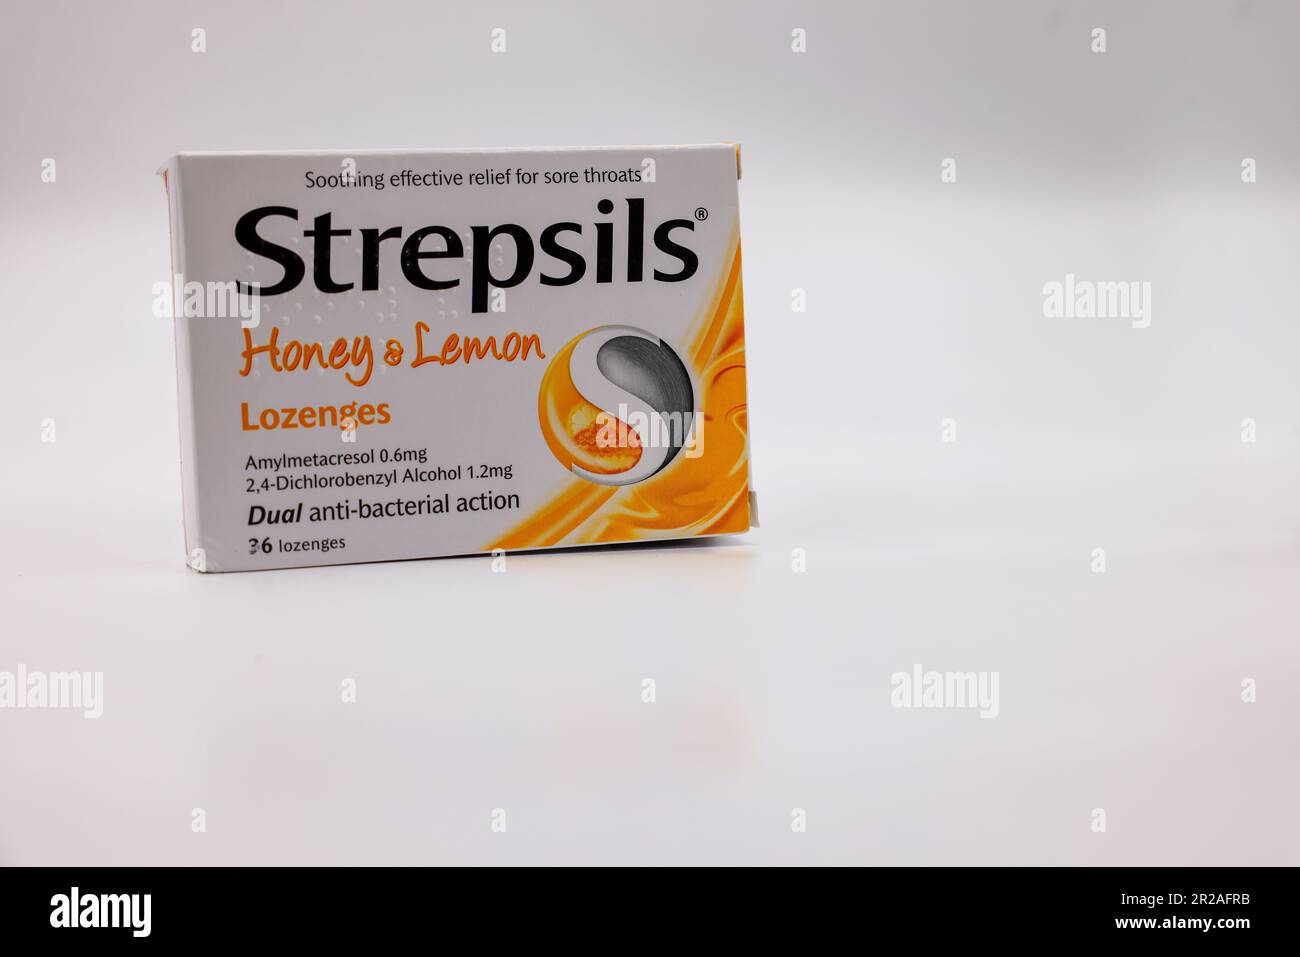 Box of Strepsils lozenges or medicine for sore throats and coughs, isolated against white background. Stock Photo